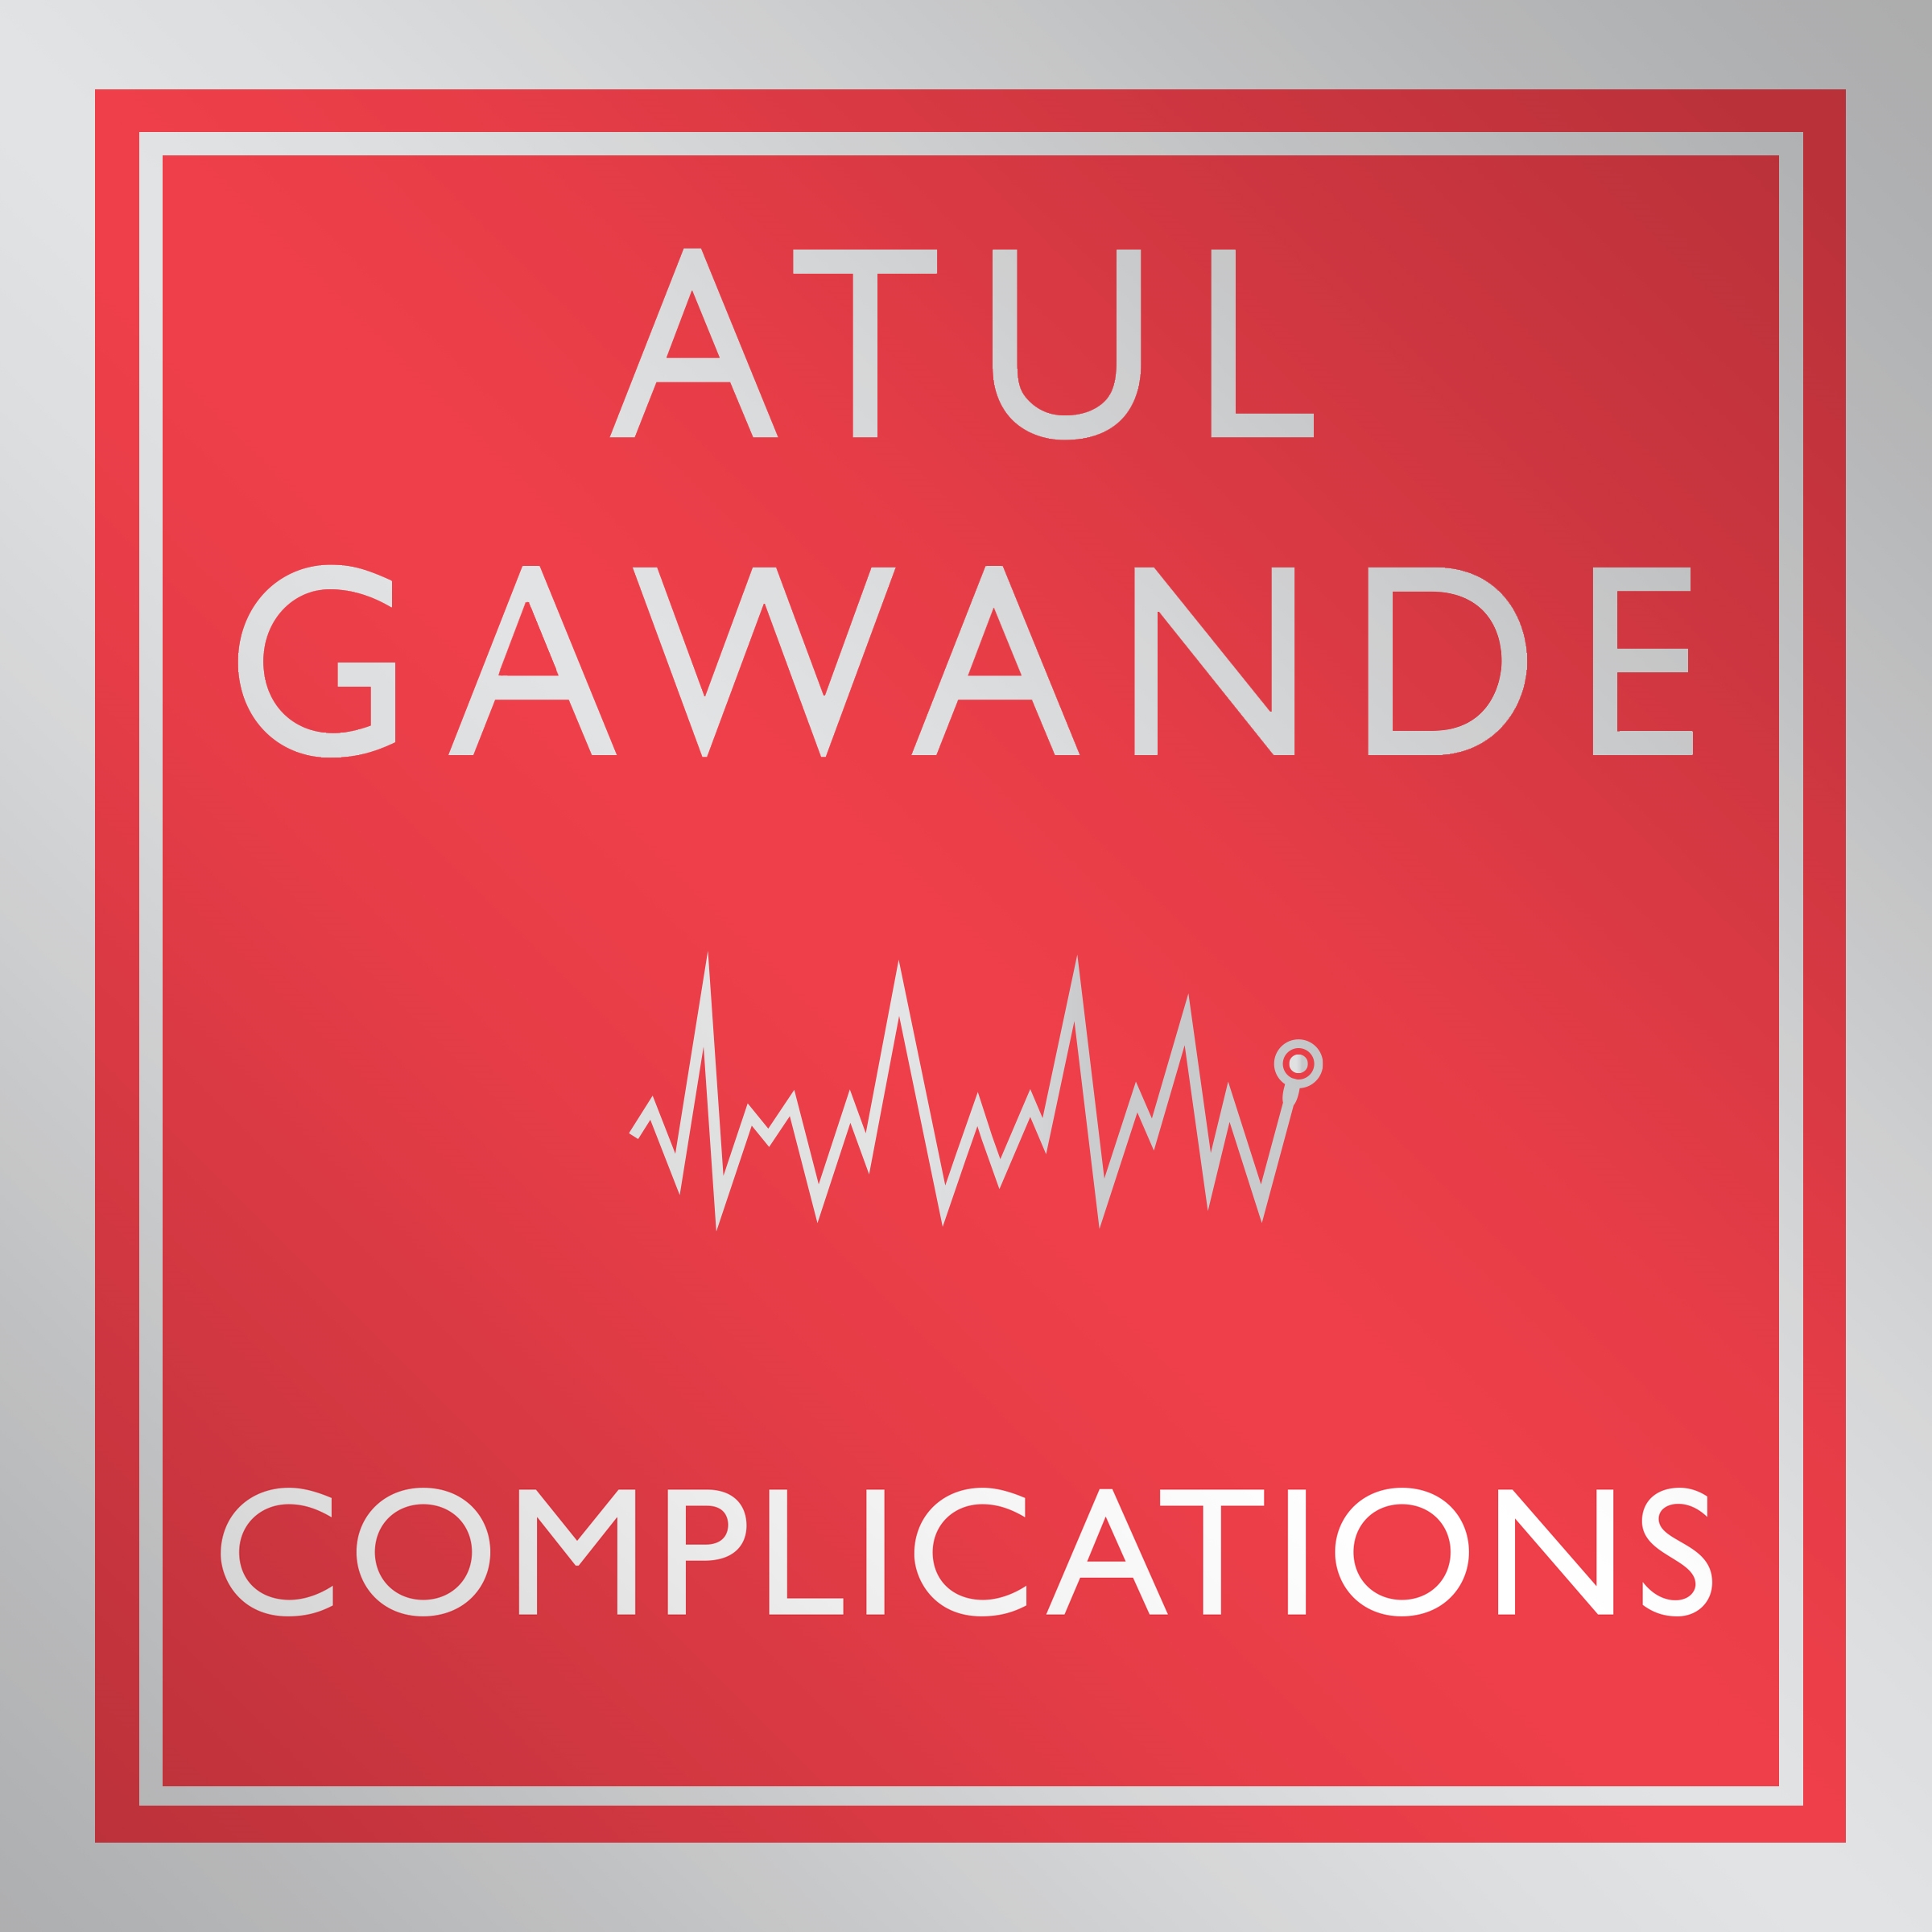 complications atul gawande sparknotes